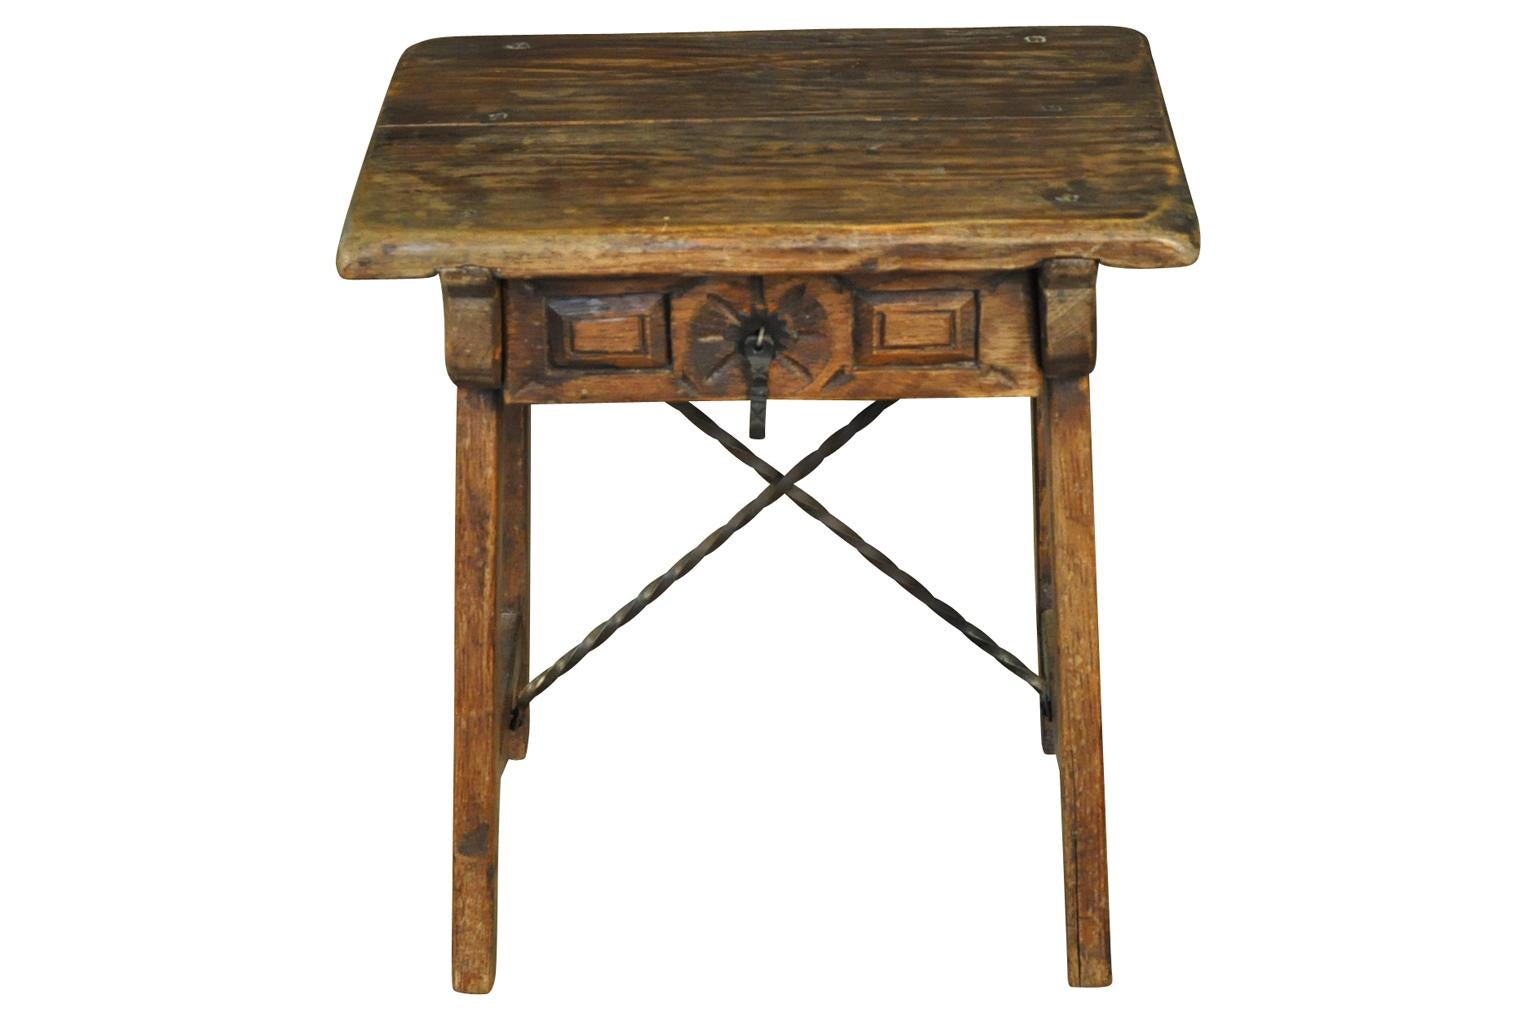 A very charming early 20th century side table from the Catalan region of Spain. Sturdily constructed from richly stained oak with iron stretchers. A charming accent piece for a casual interior.